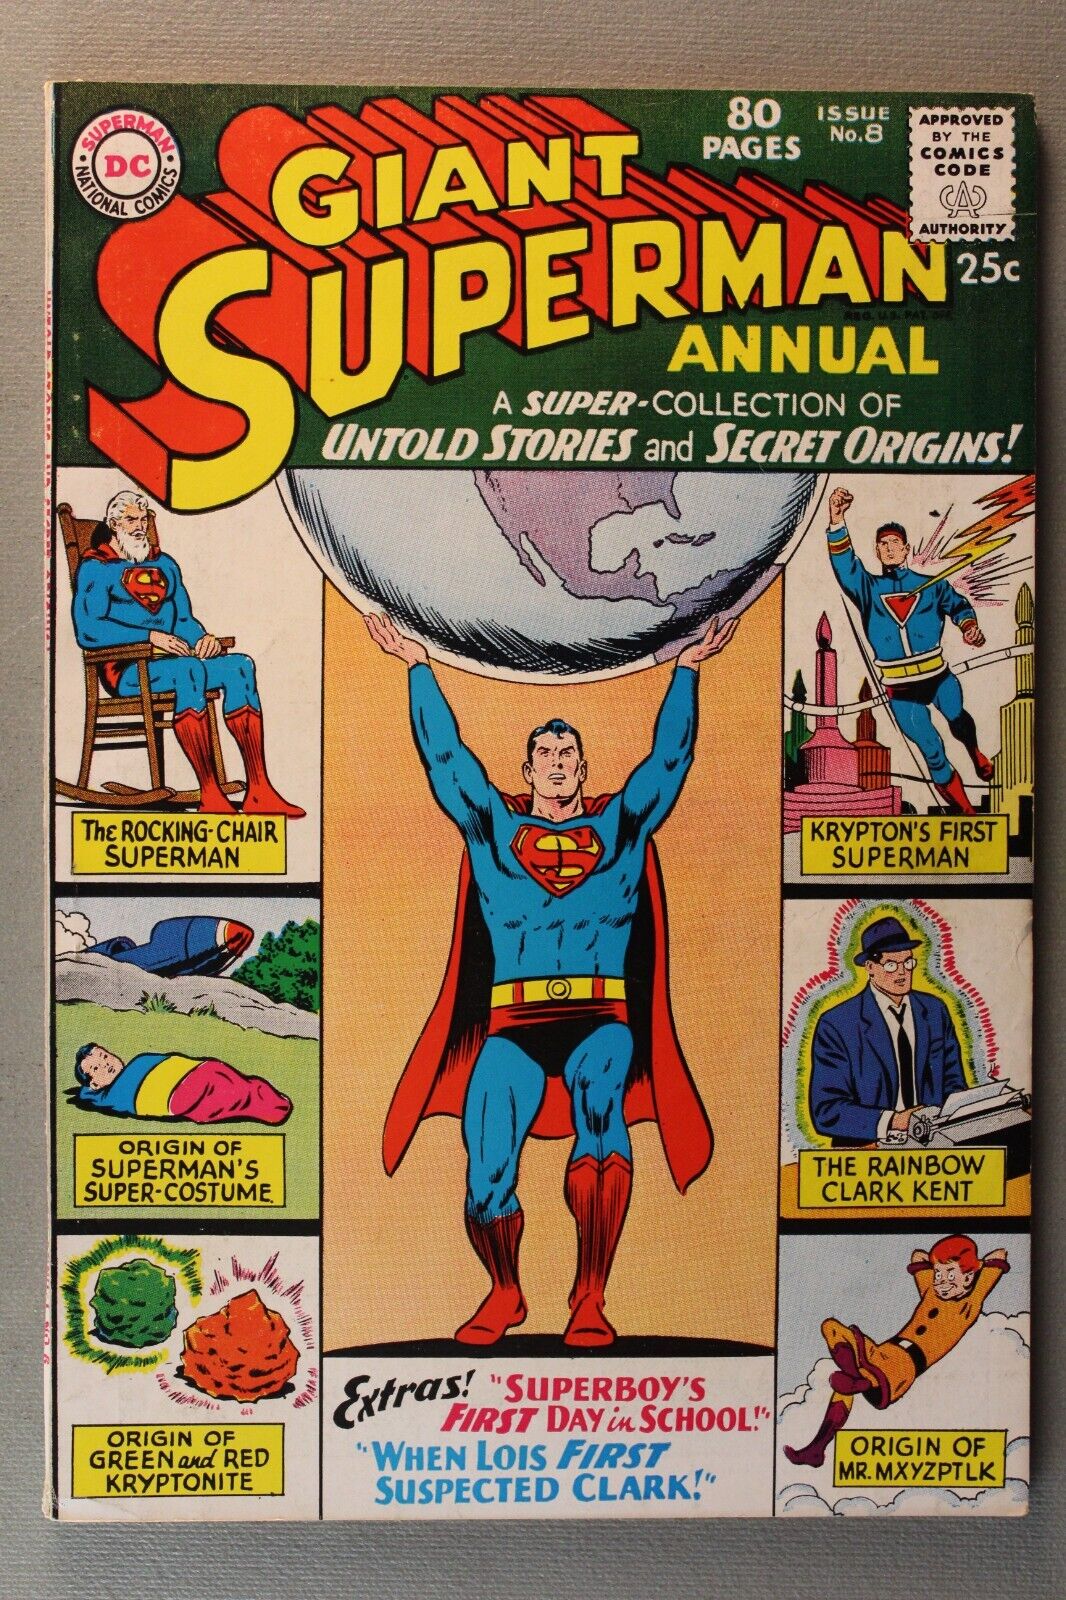 GIANT Superman Annual #8 ~80 Pages~ *Winter 1963-1964* Cover is Nice 